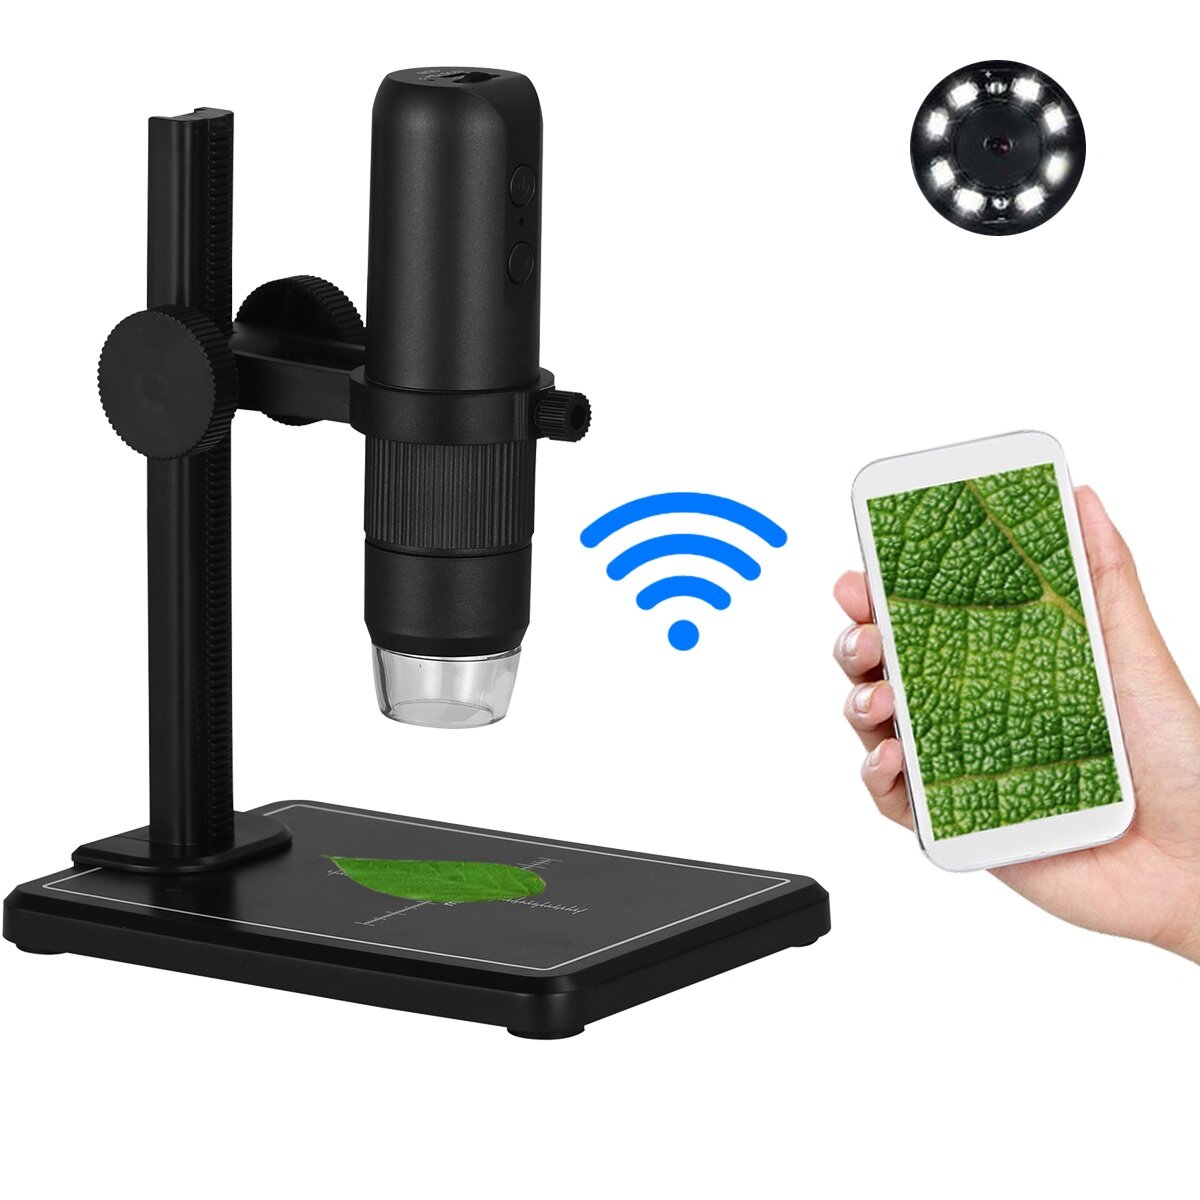 Portable USB Wifi Microscope 8 LED Light Adjustable Dimmer Real-Time 0-1000X Practical Handheld Magn